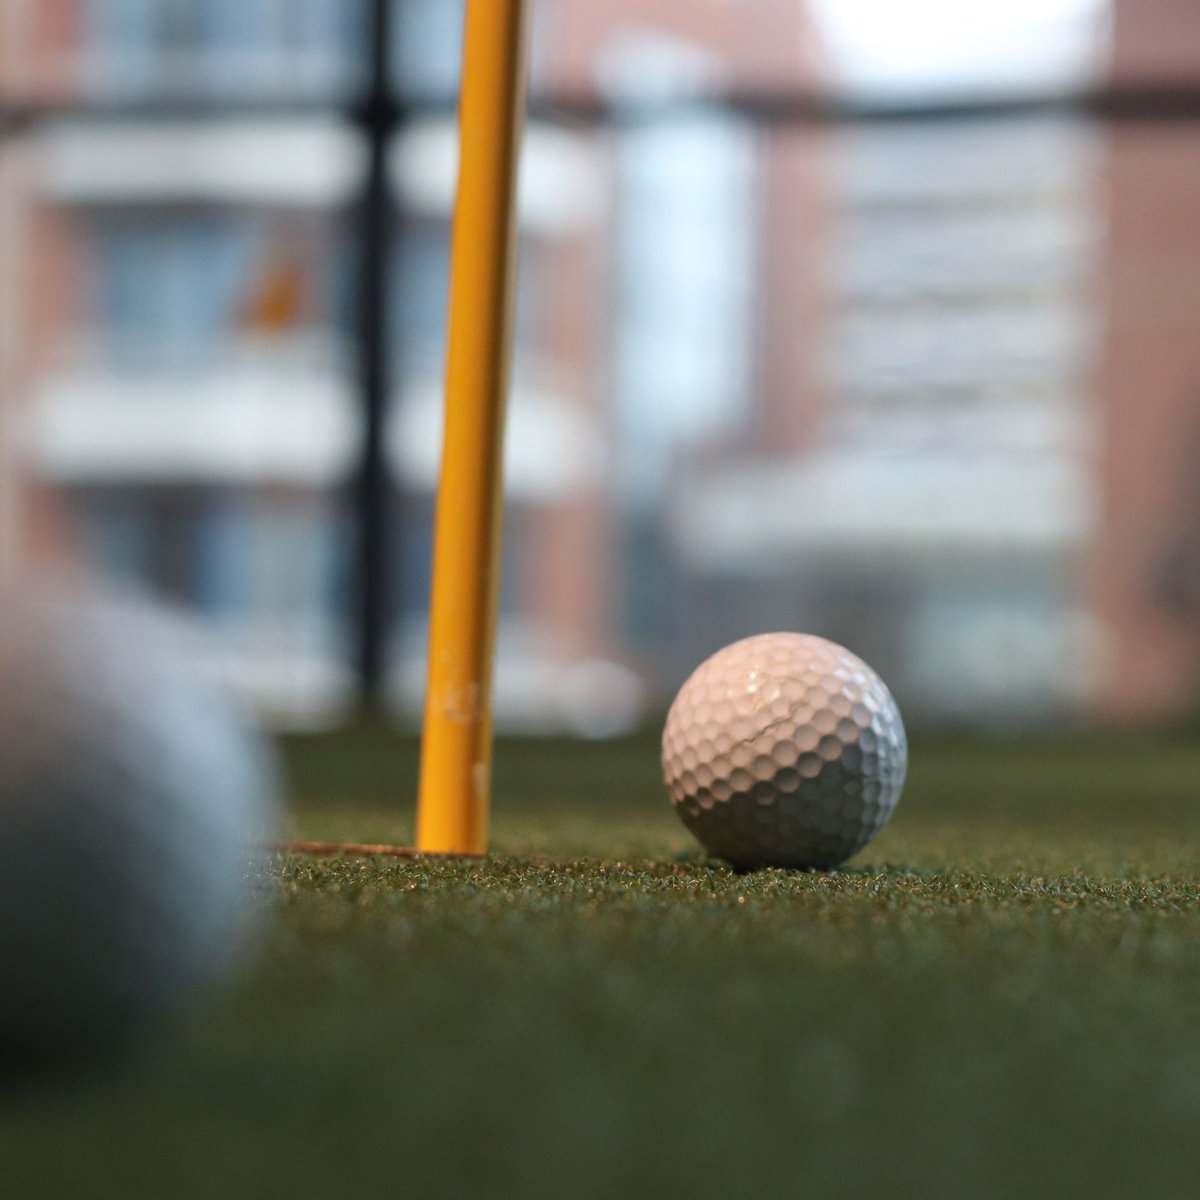 We're open today! Come join us for golf, food & beer. Name a more iconic trio.... If you’ve still not got plans for New Year’s Eve, come and join us for our Masquerade Ball. Book here: bit.ly/3525f7Y #Spinningfields #Golf #MCR